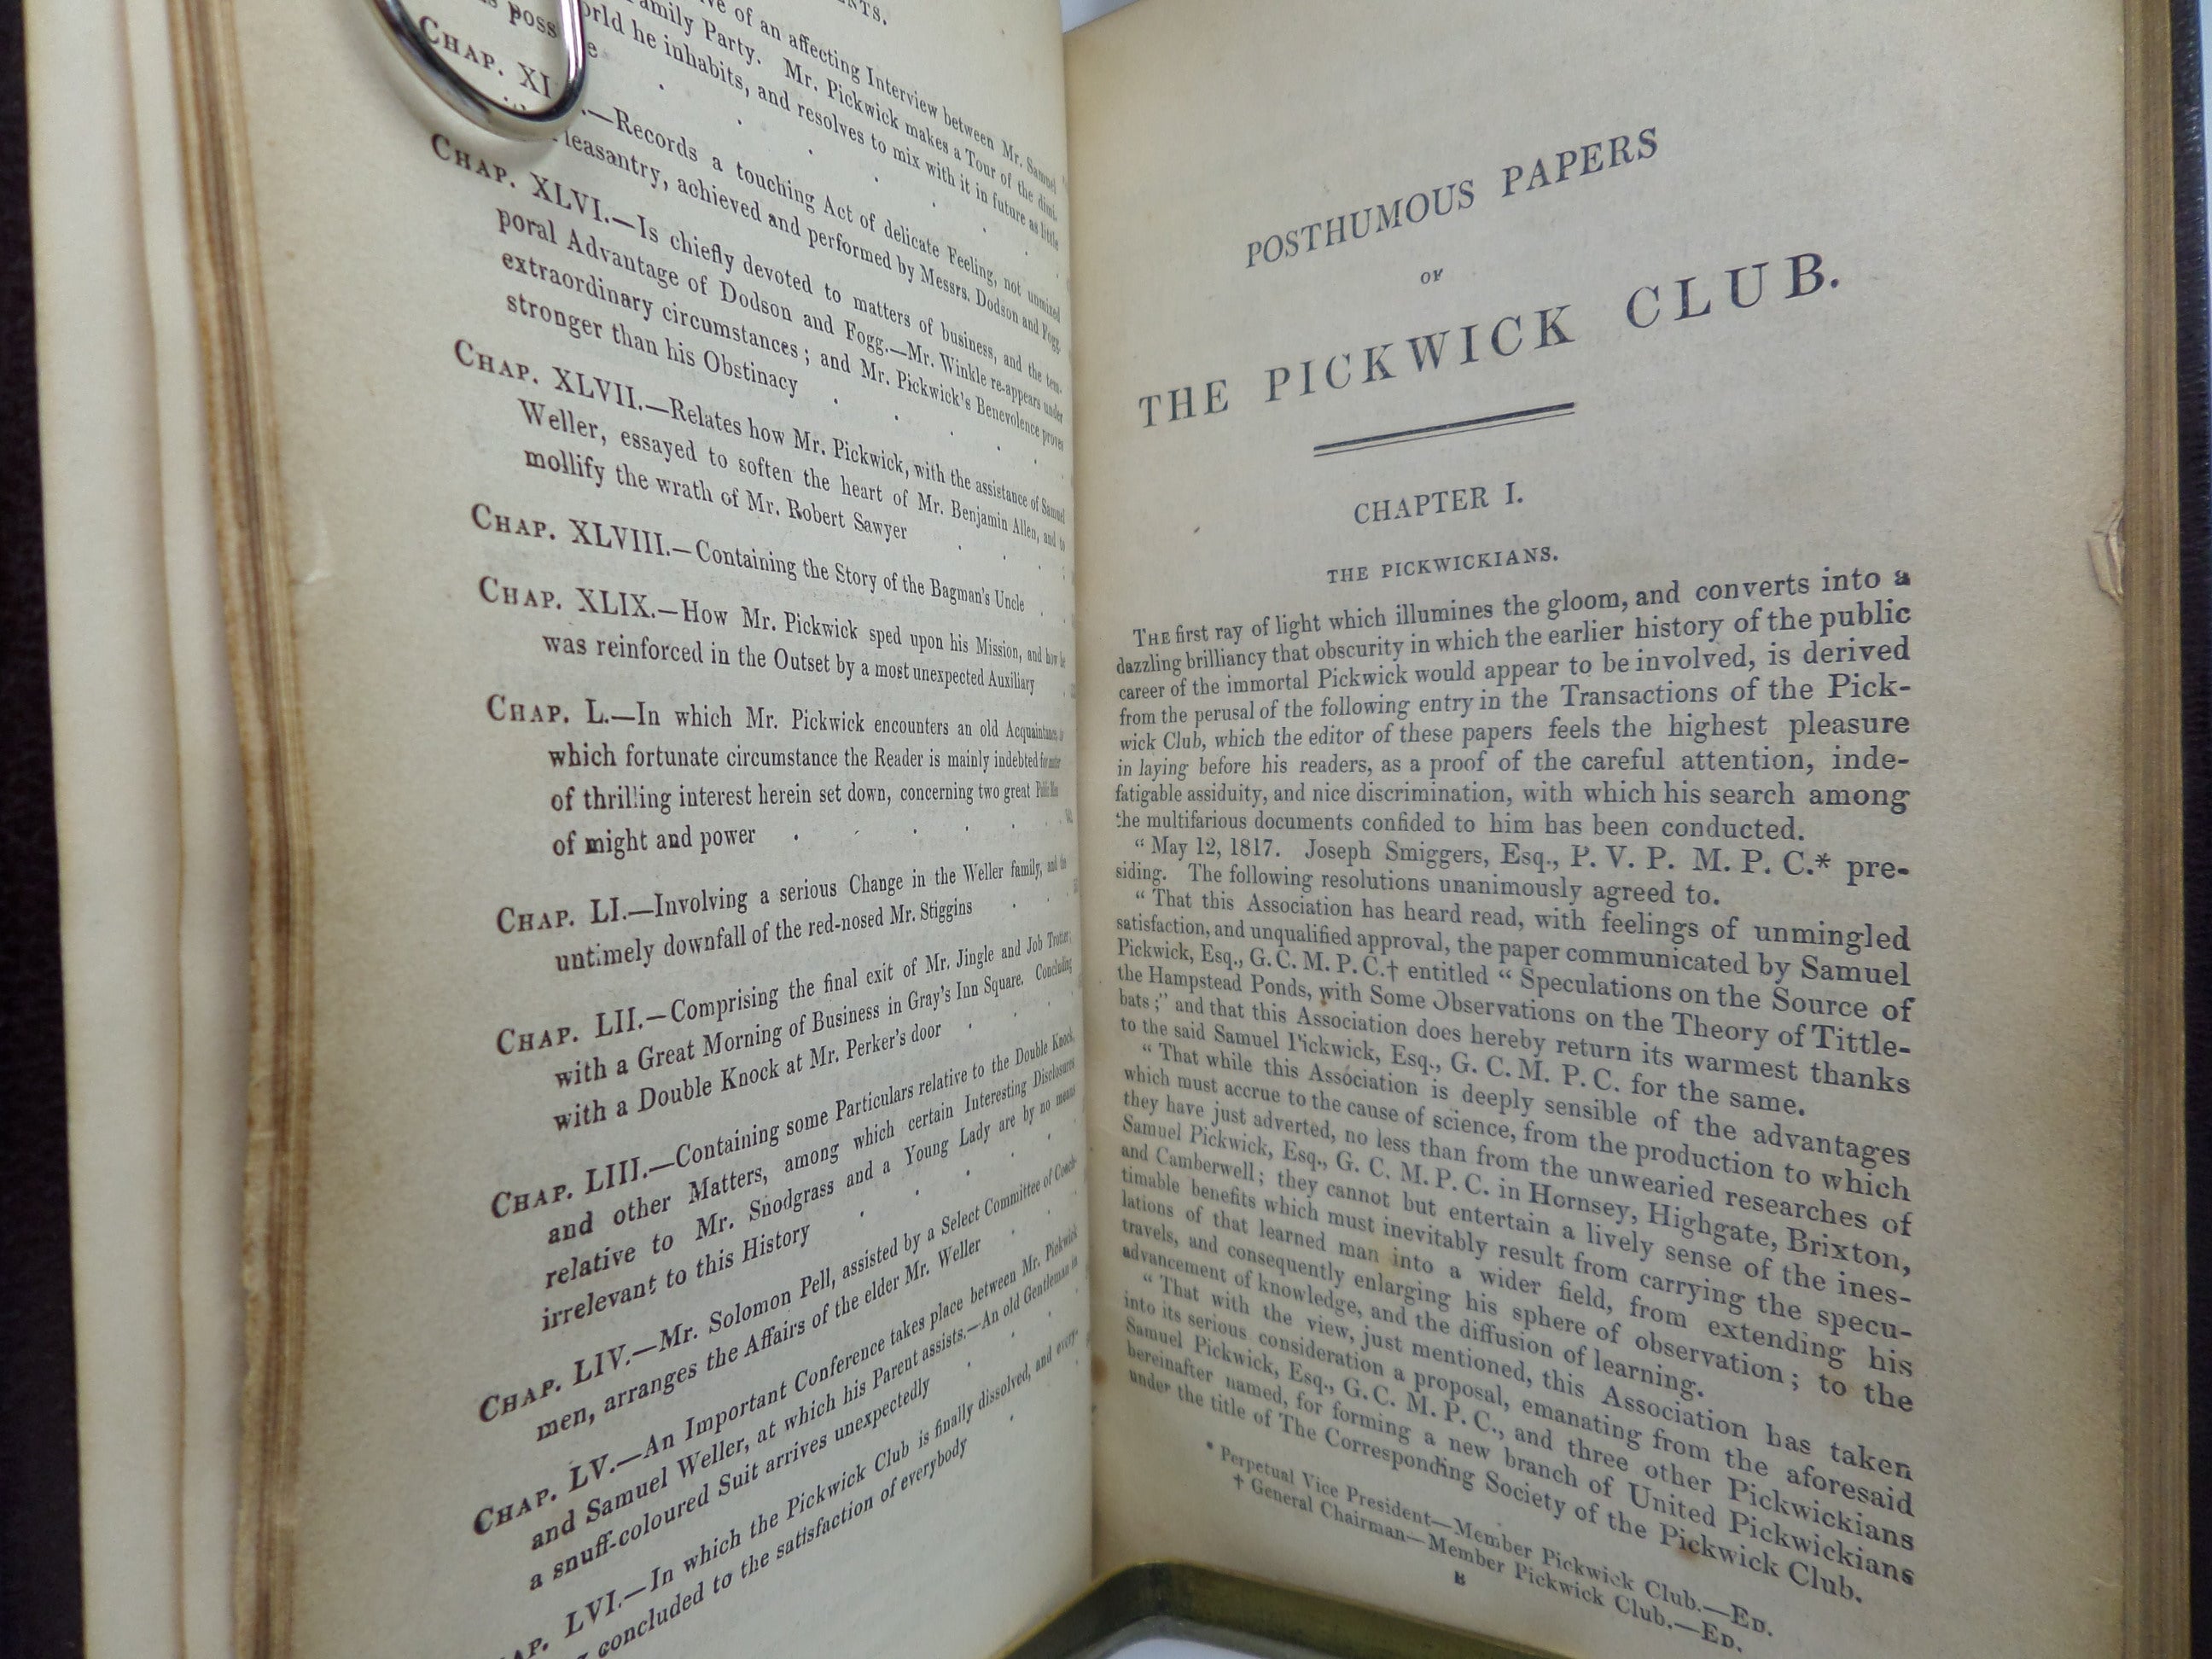 THE POSTHUMOUS PAPERS OF THE PICKWICK CLUB BY CHARLES DICKENS 1837 FIRST EDITION